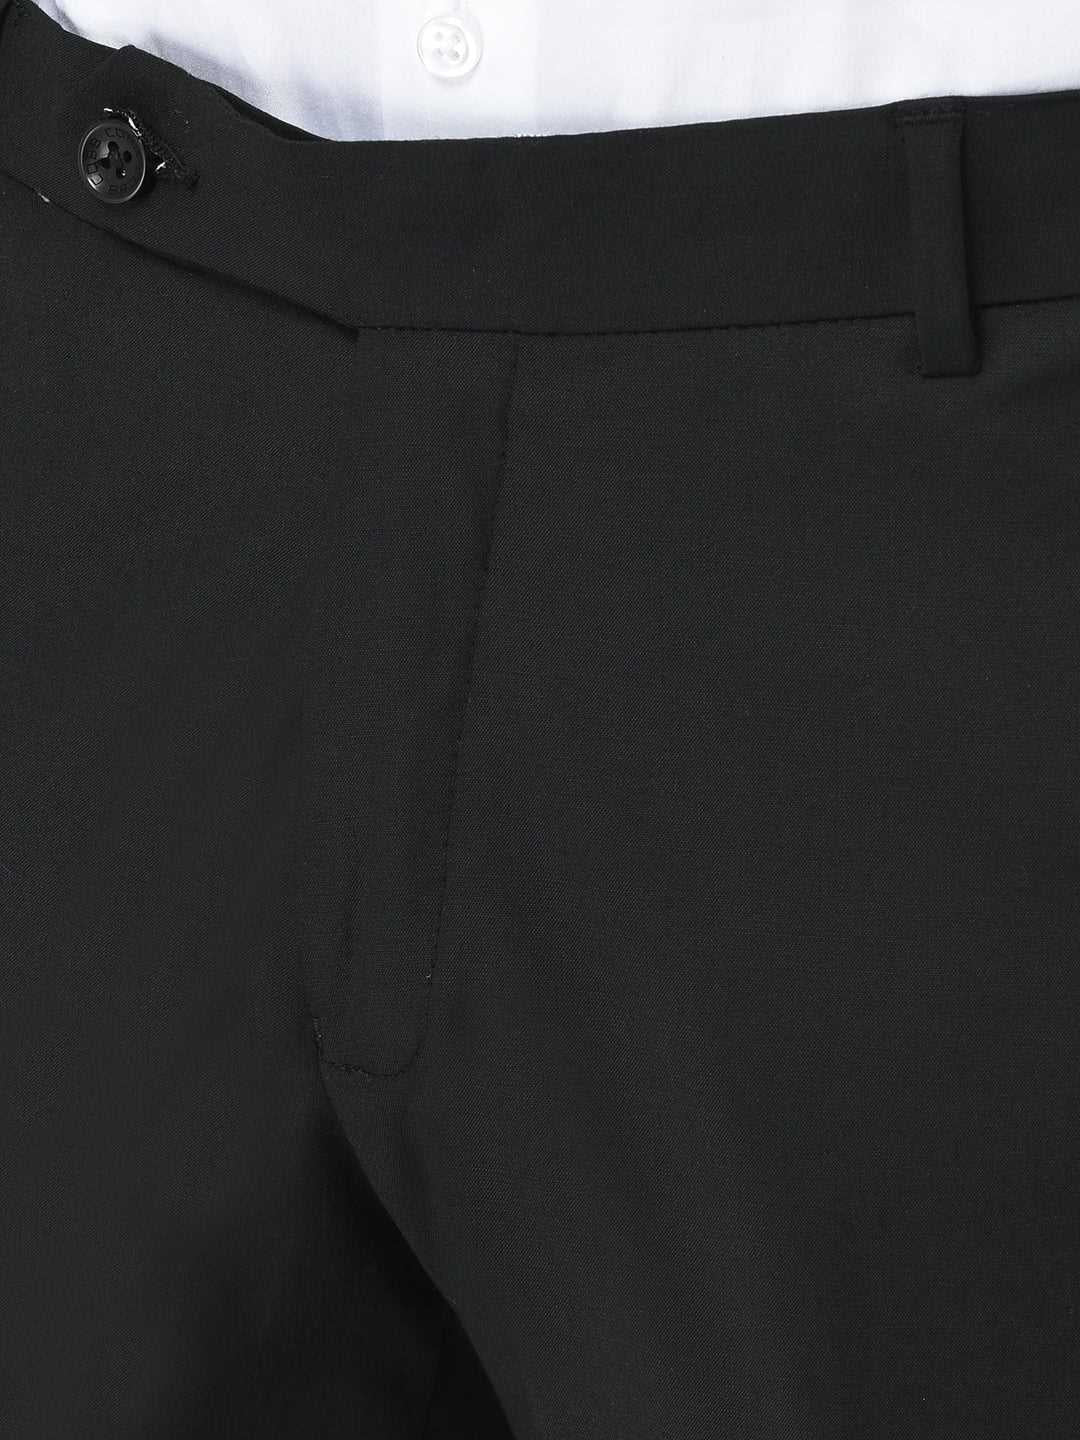 Cobb Trousers - Buy Cobb Trousers online in India